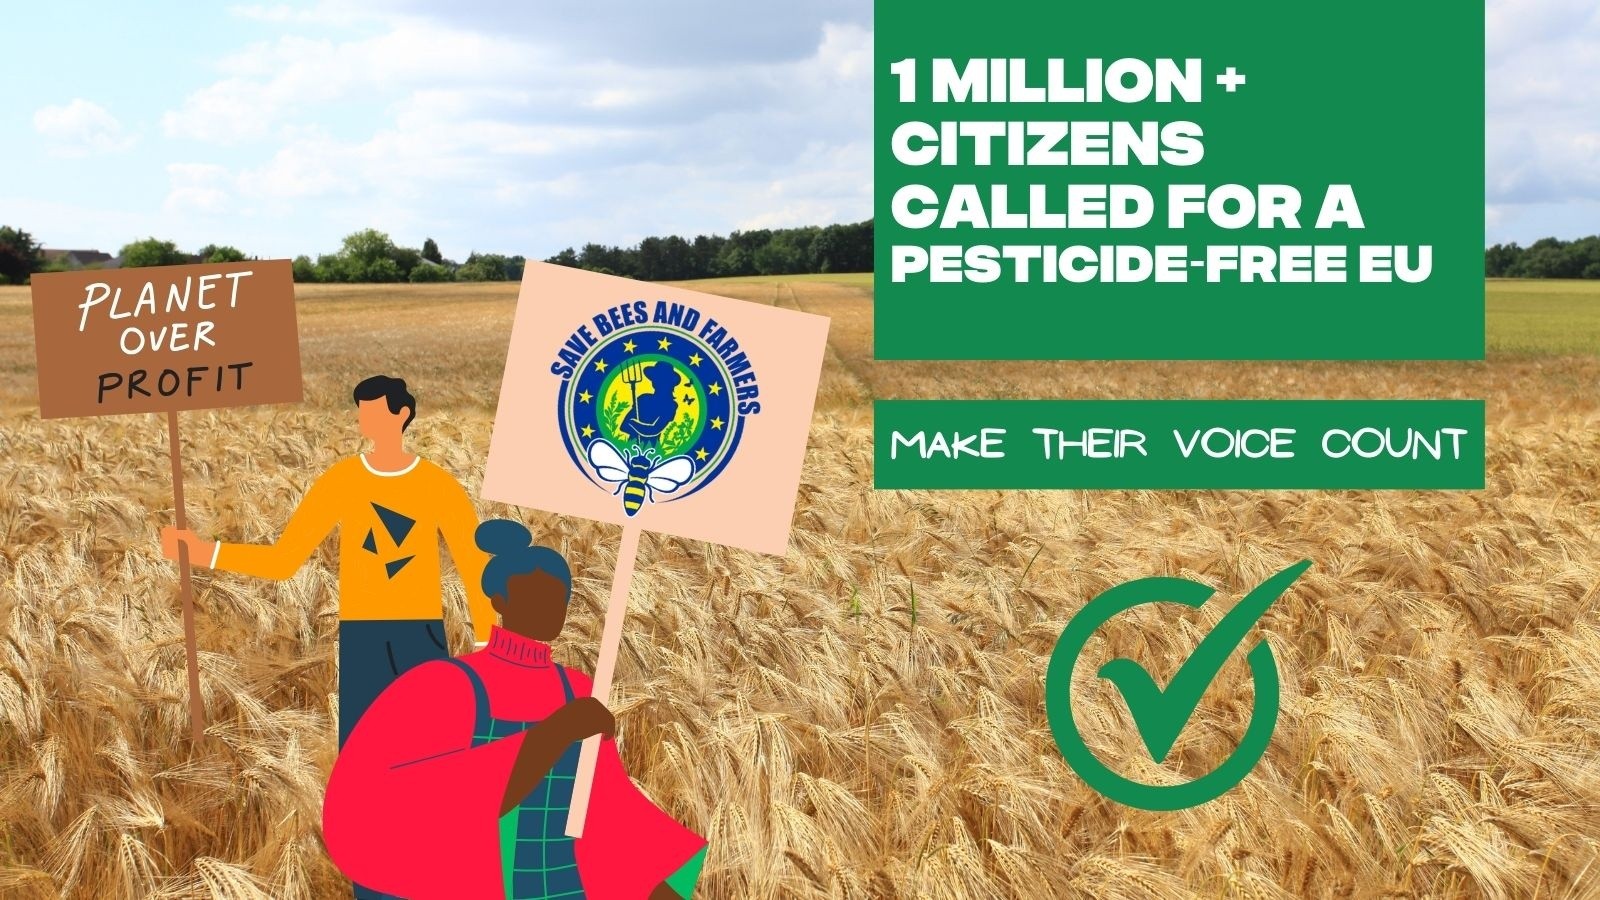 Joint statement: For an ambitious pesticides regulation that protects people, biodiversity and ecosystems